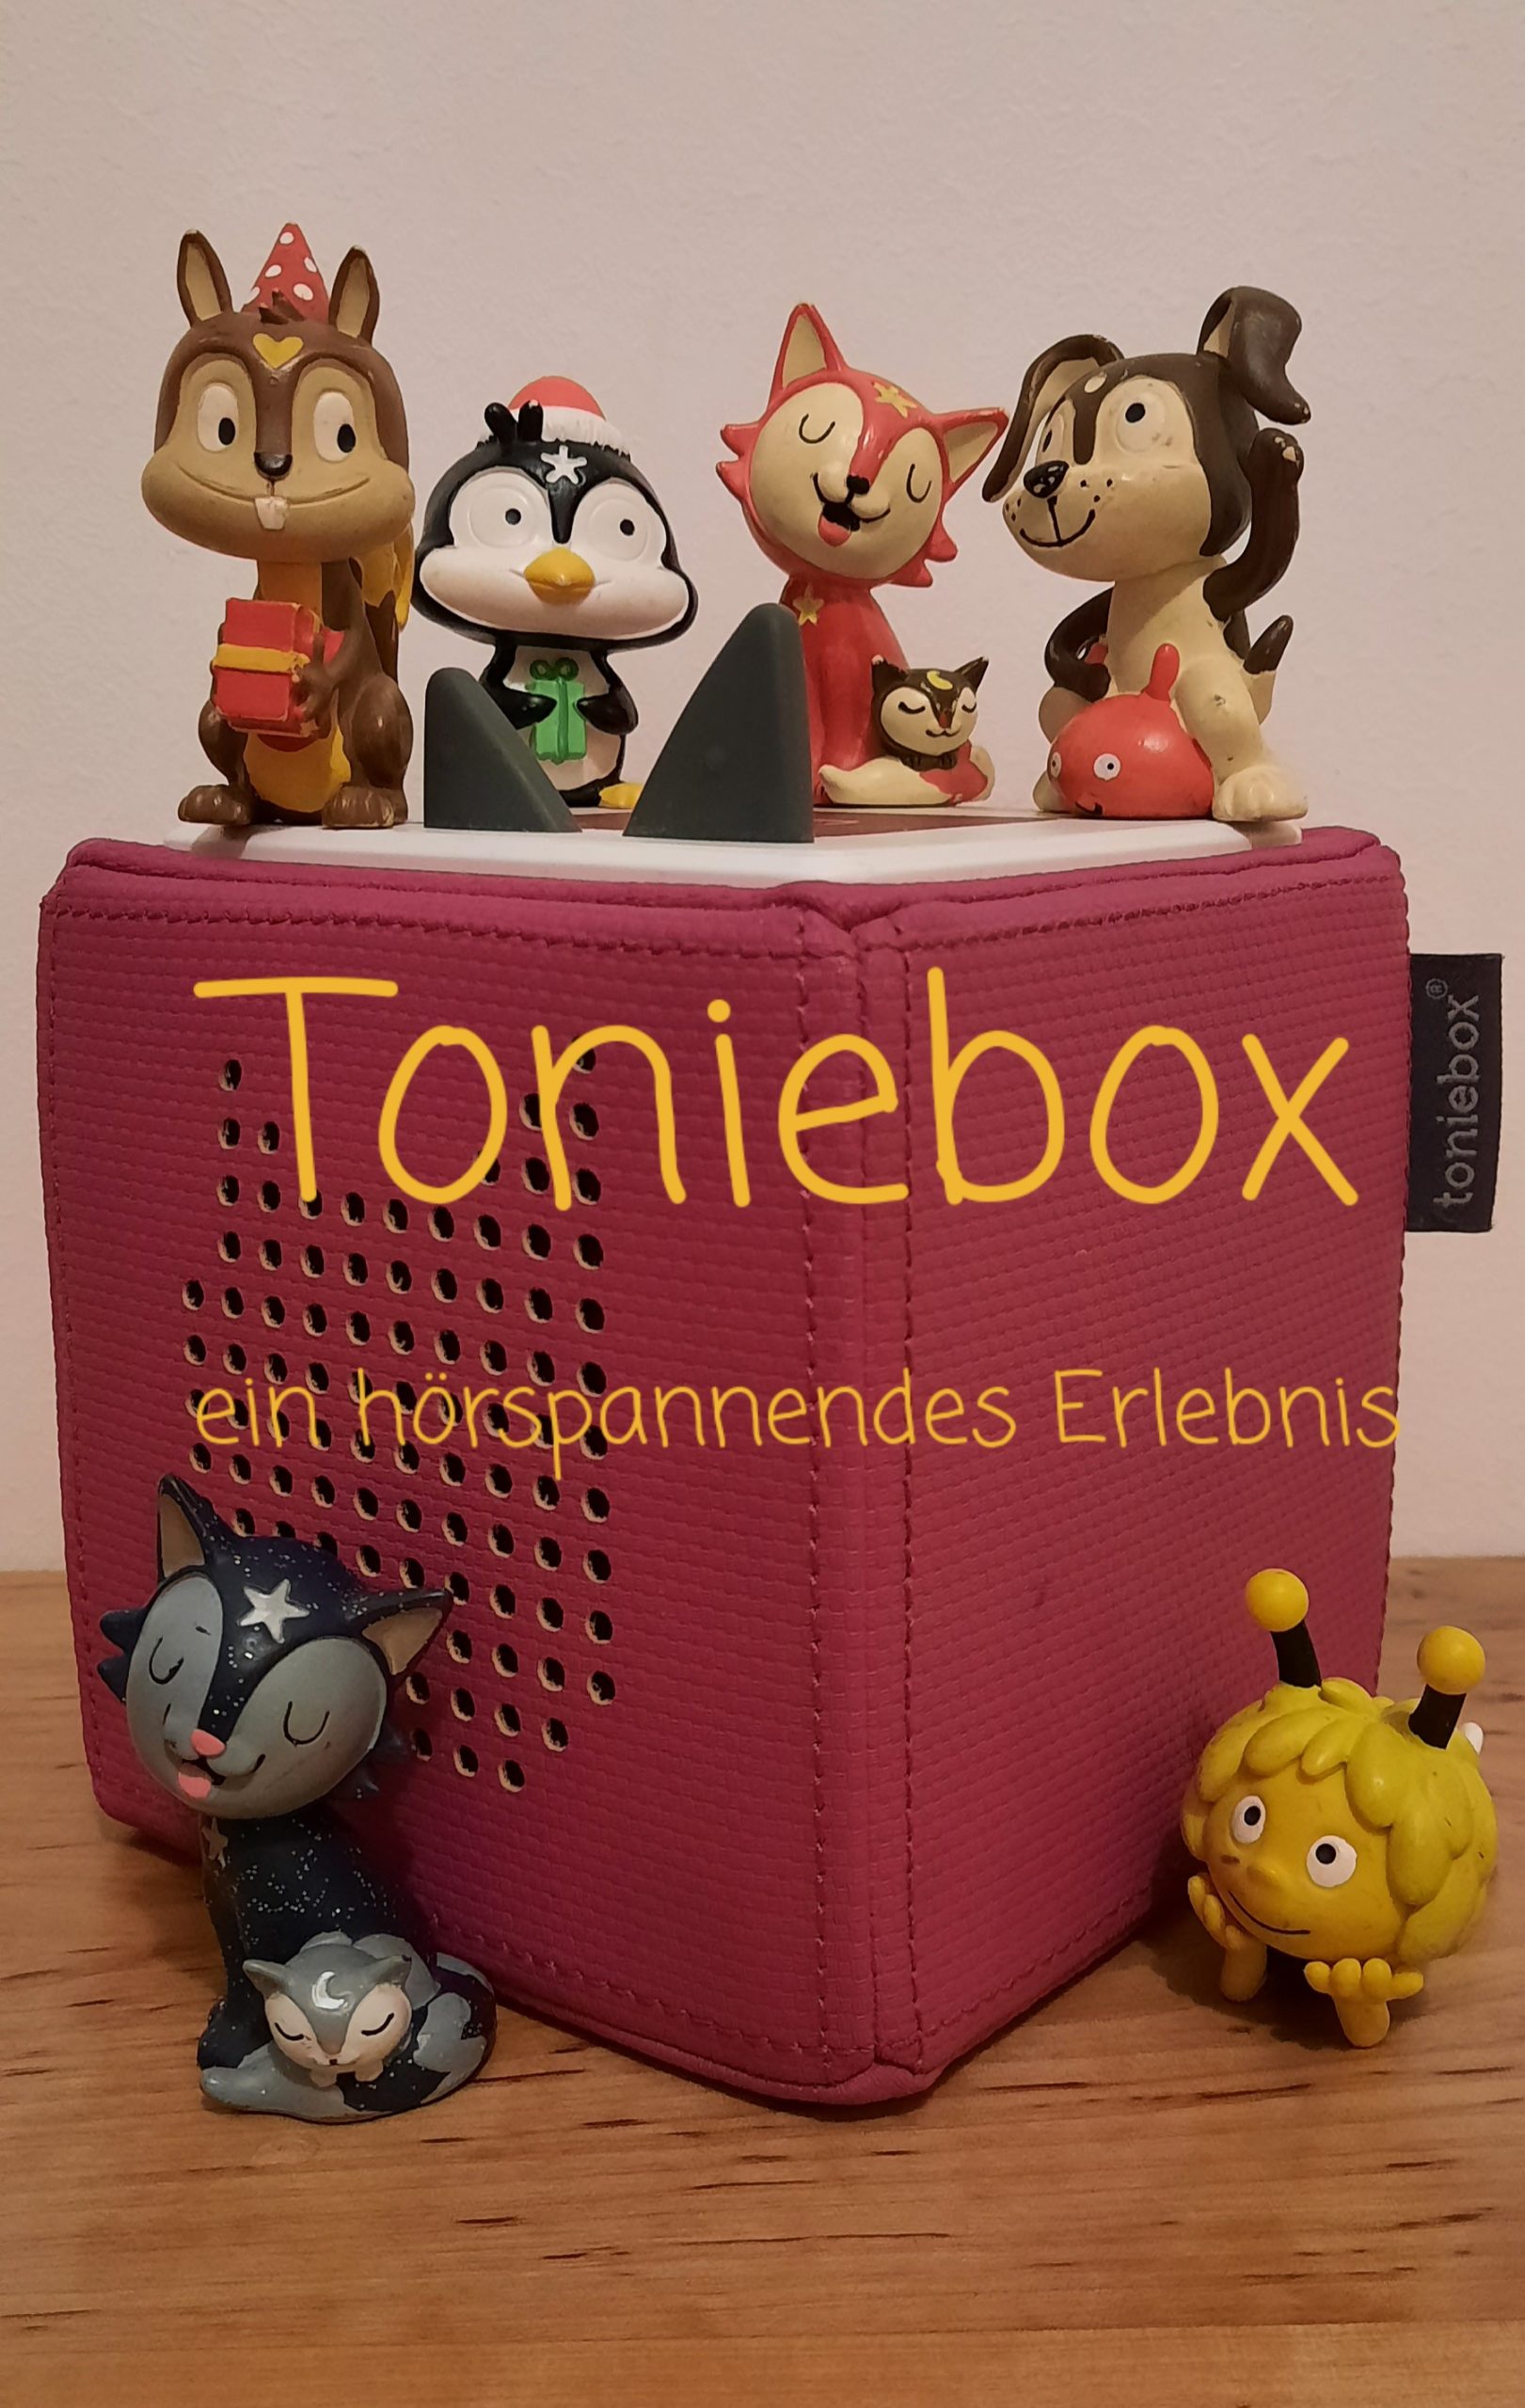 You are currently viewing BLOG: Tonie-Box ein hörspannendes Erlebnis